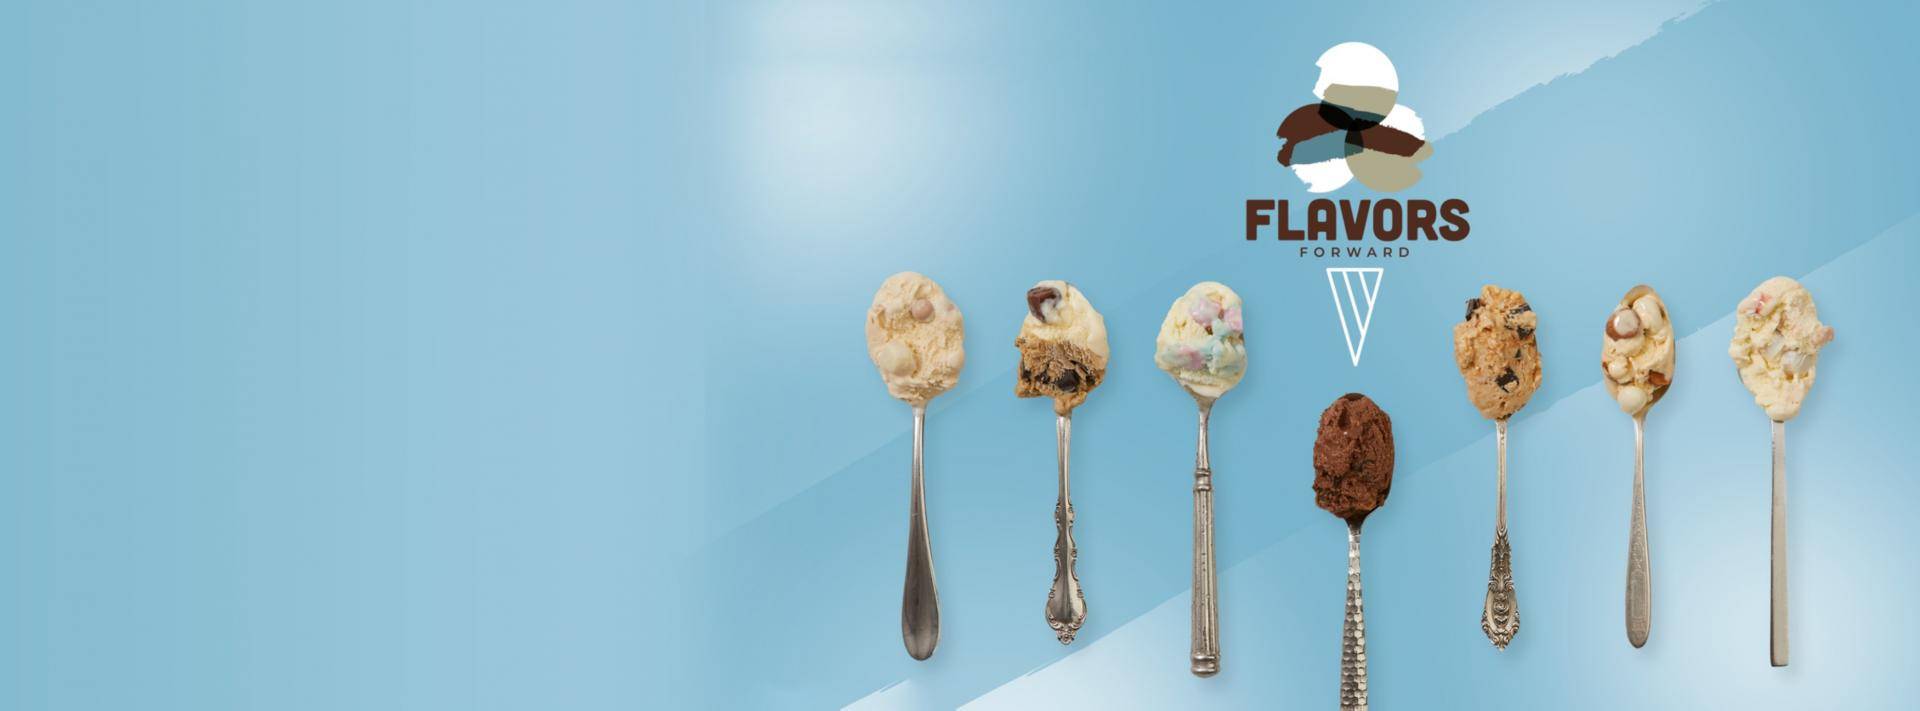 spoons with ice cream on them on a blue background